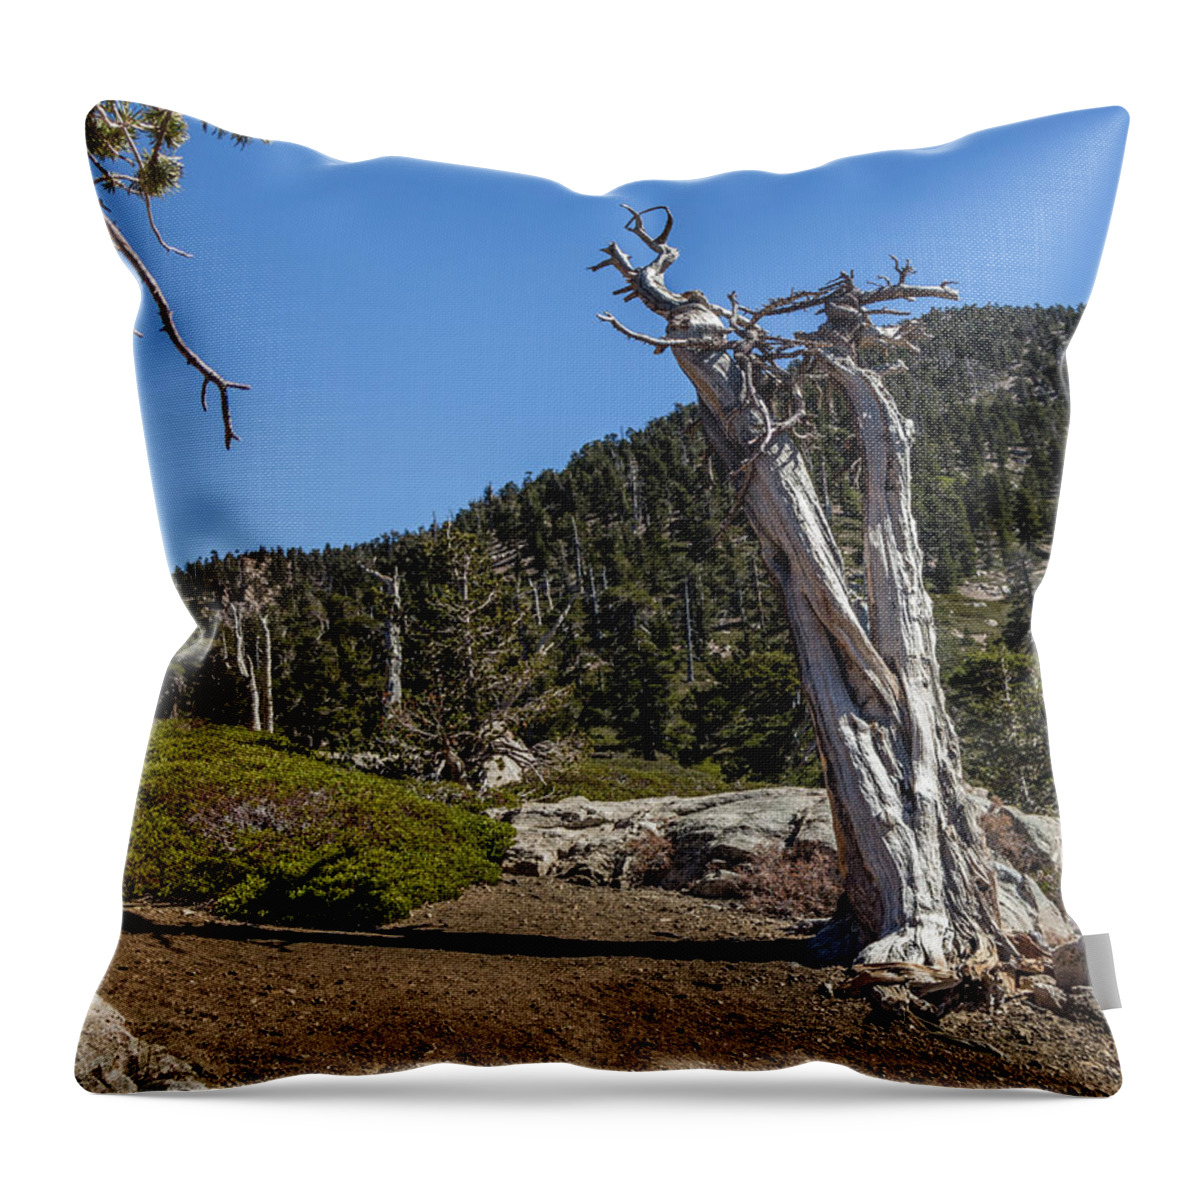 Socal Throw Pillow featuring the photograph Dead Tree by Ed Clark